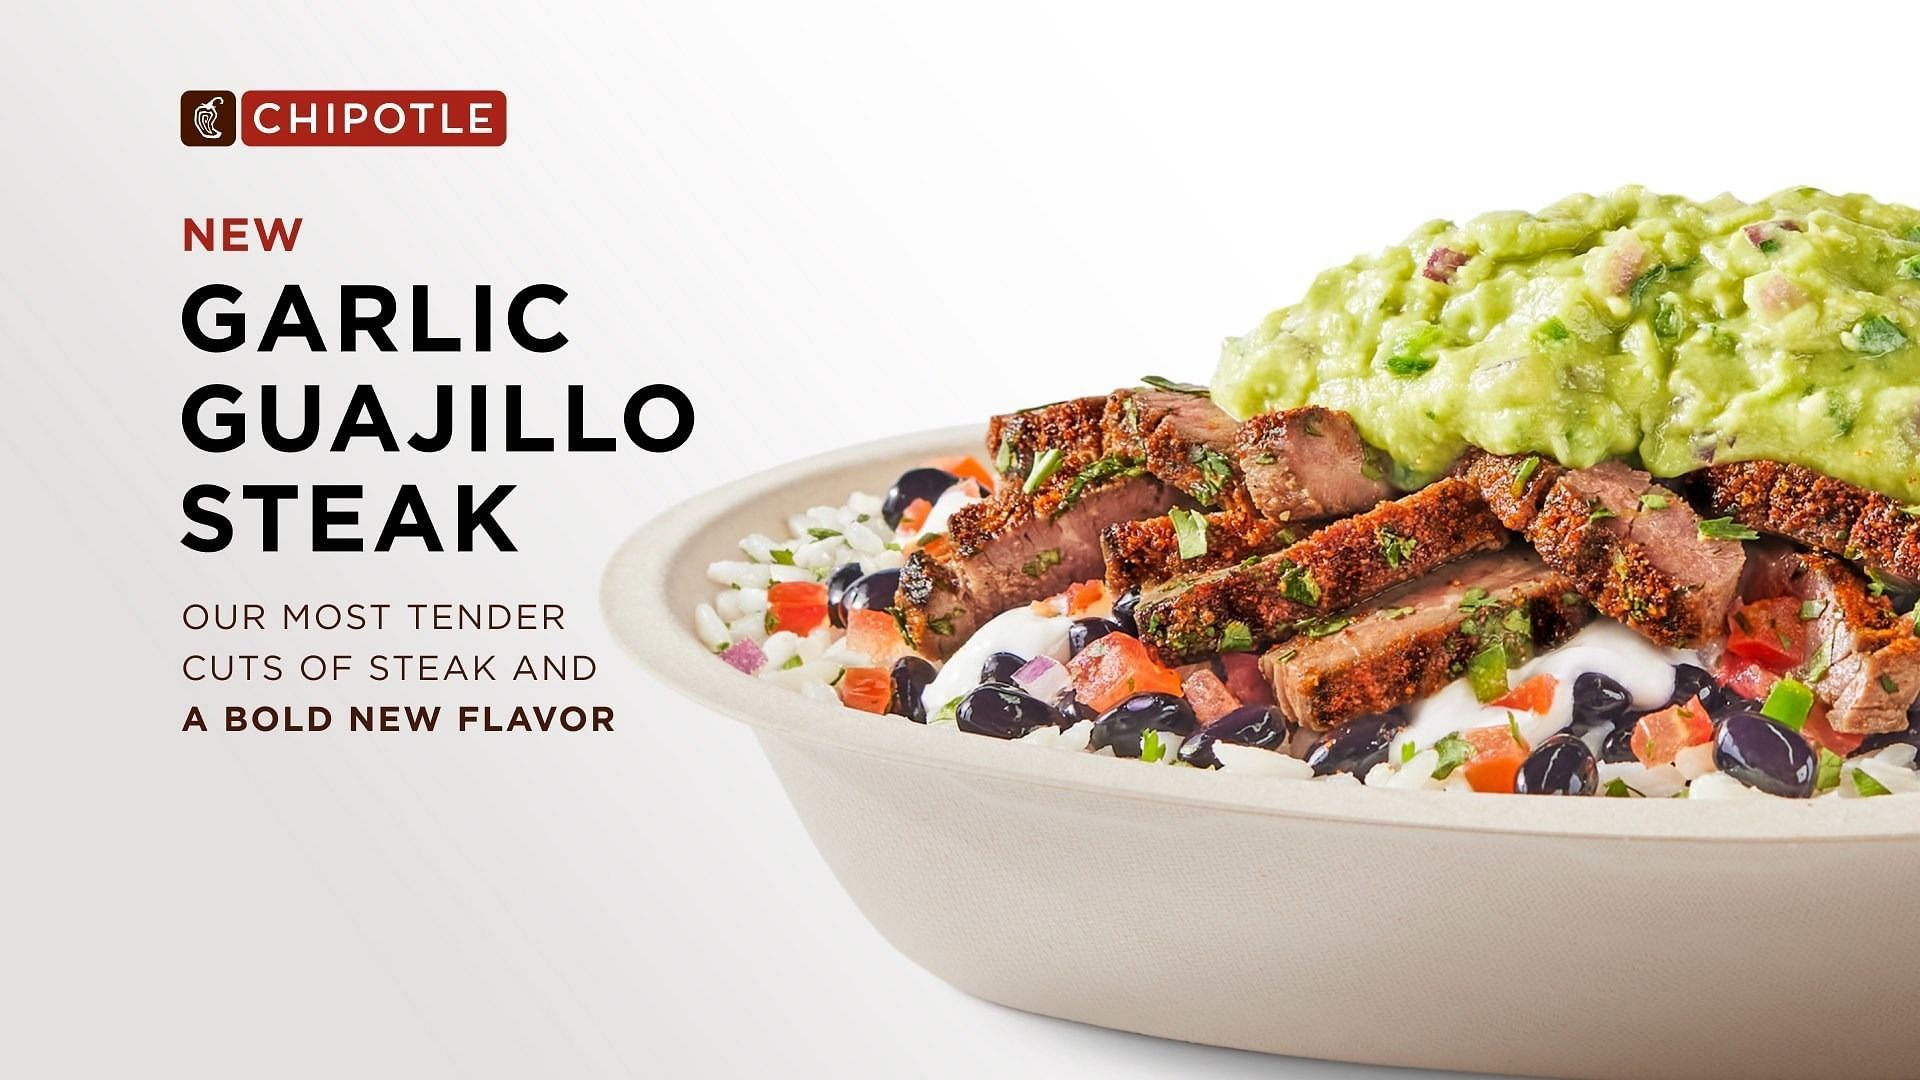 The Garlic Guajillo Steak is being tested from May 3 across 102 participating restaurants (Image via Chipotle)